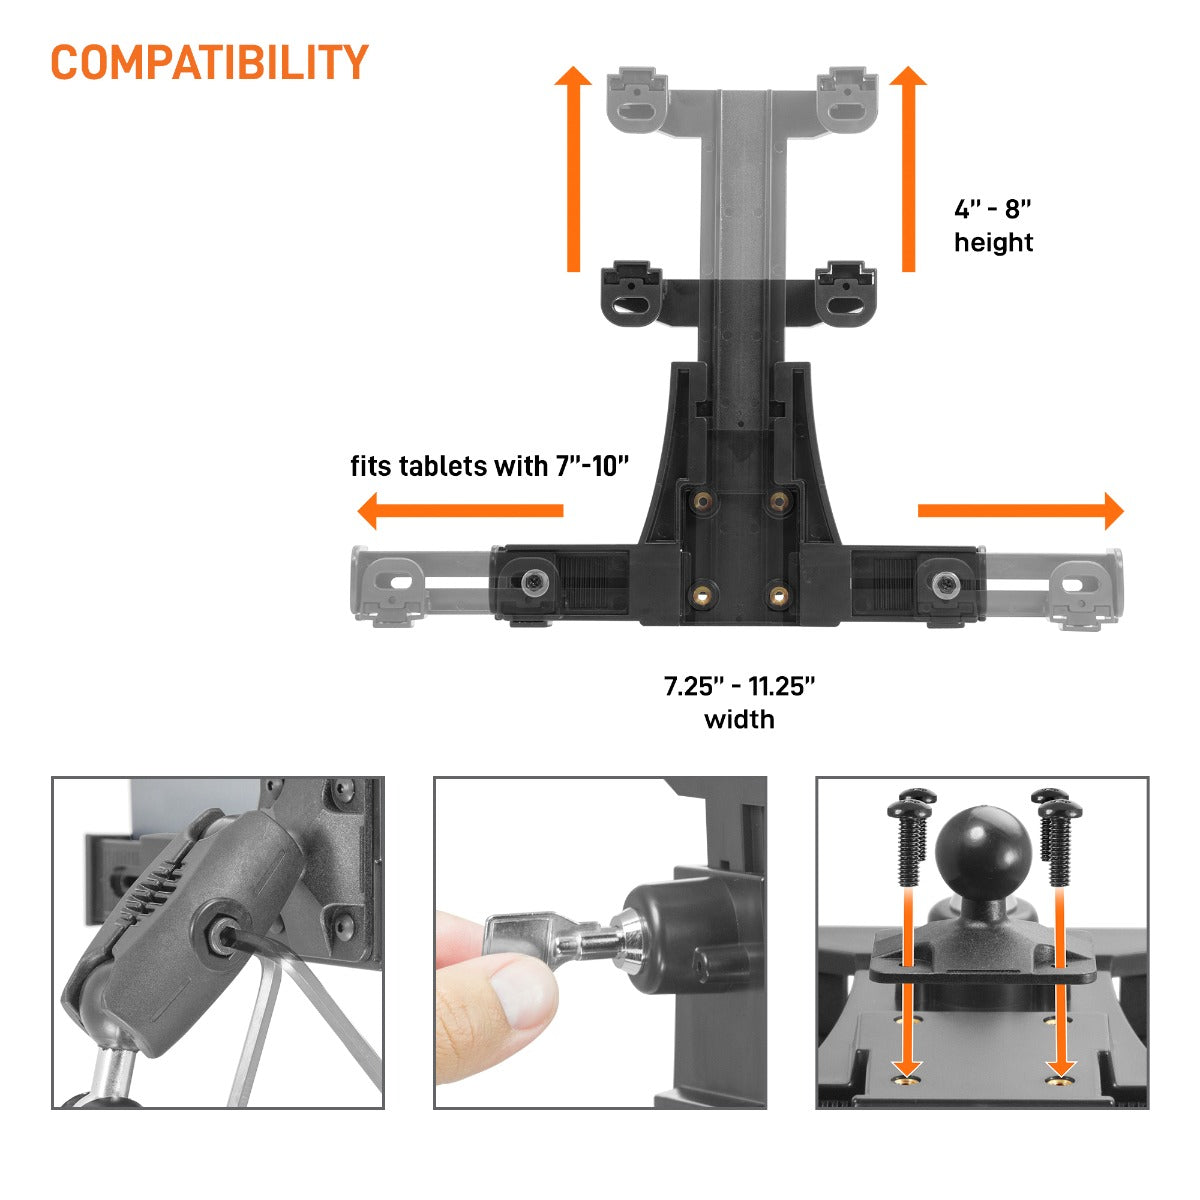 iBOLT Tablet Tower- Dock’n Lock POS Locking Drill Base Mount - with 3 Tablet Holders